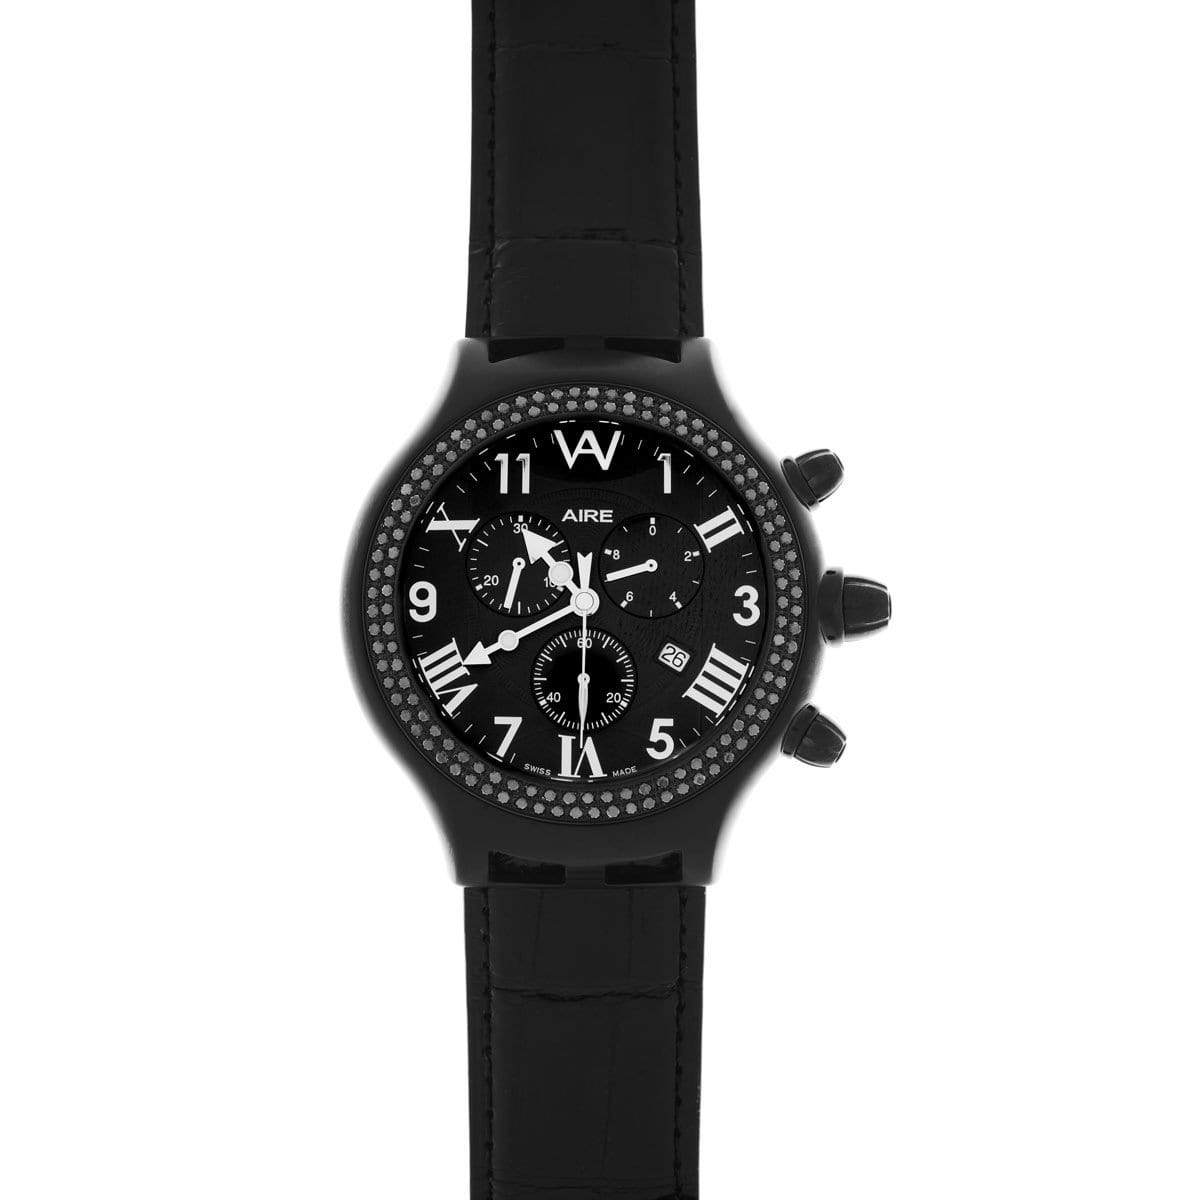 CHRIS AIRE WATCH - PARLAY CHRONOGRAPH BLACK - Chris Aire Fine Jewelry & Timepieces